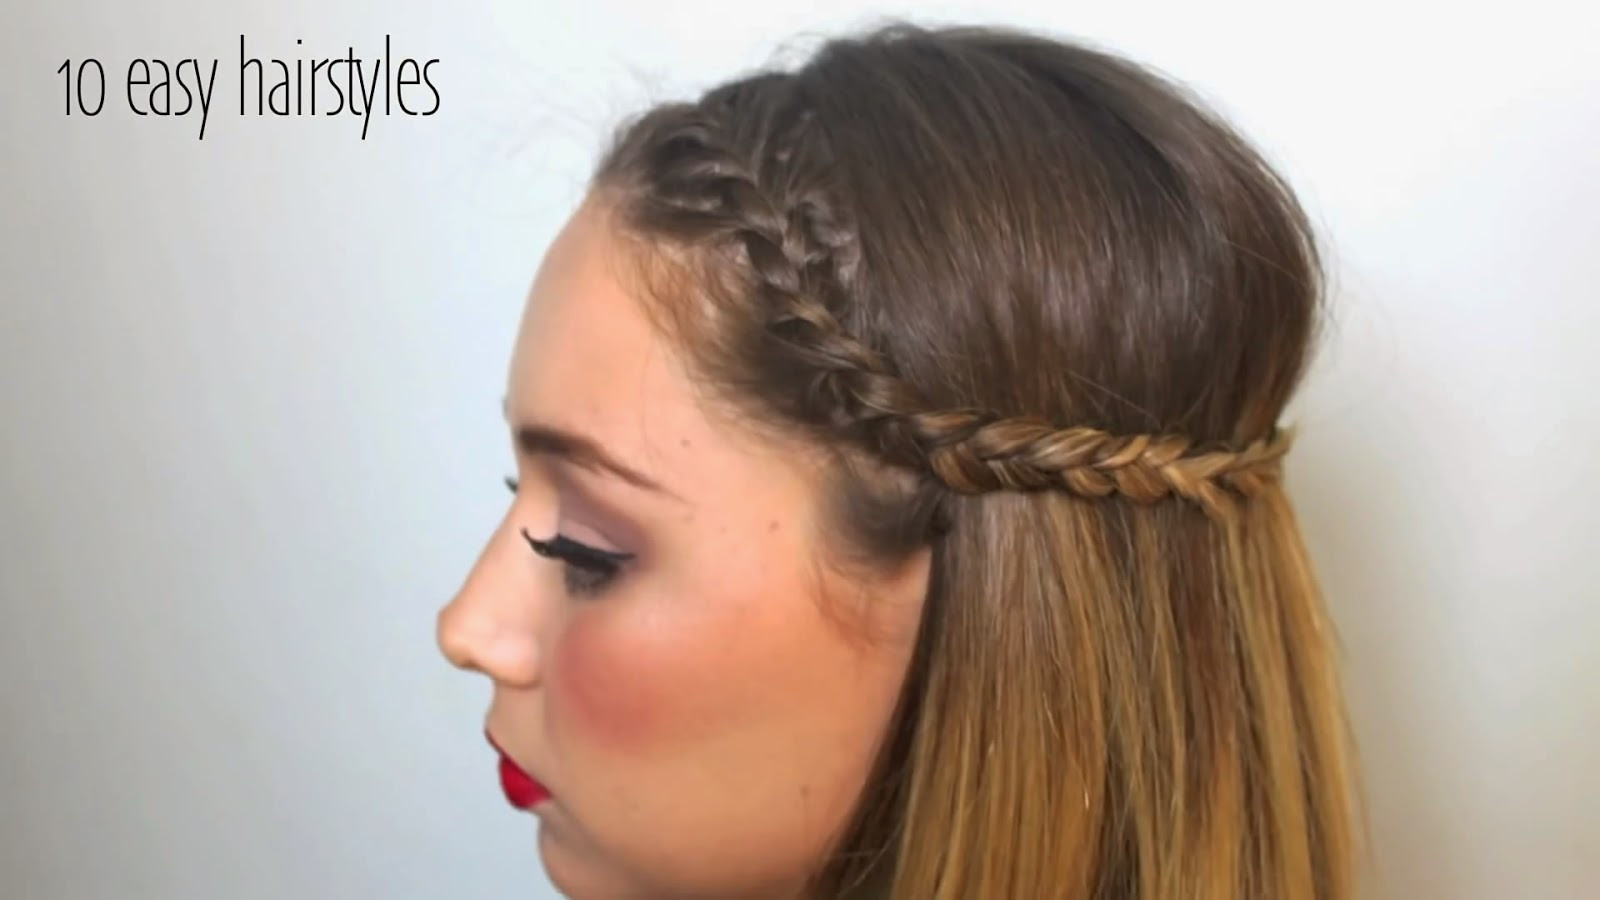 10 Easy Hairstyles
 StyleVia Top 10 Easy Hairstyles Can Set in 5 Minutes